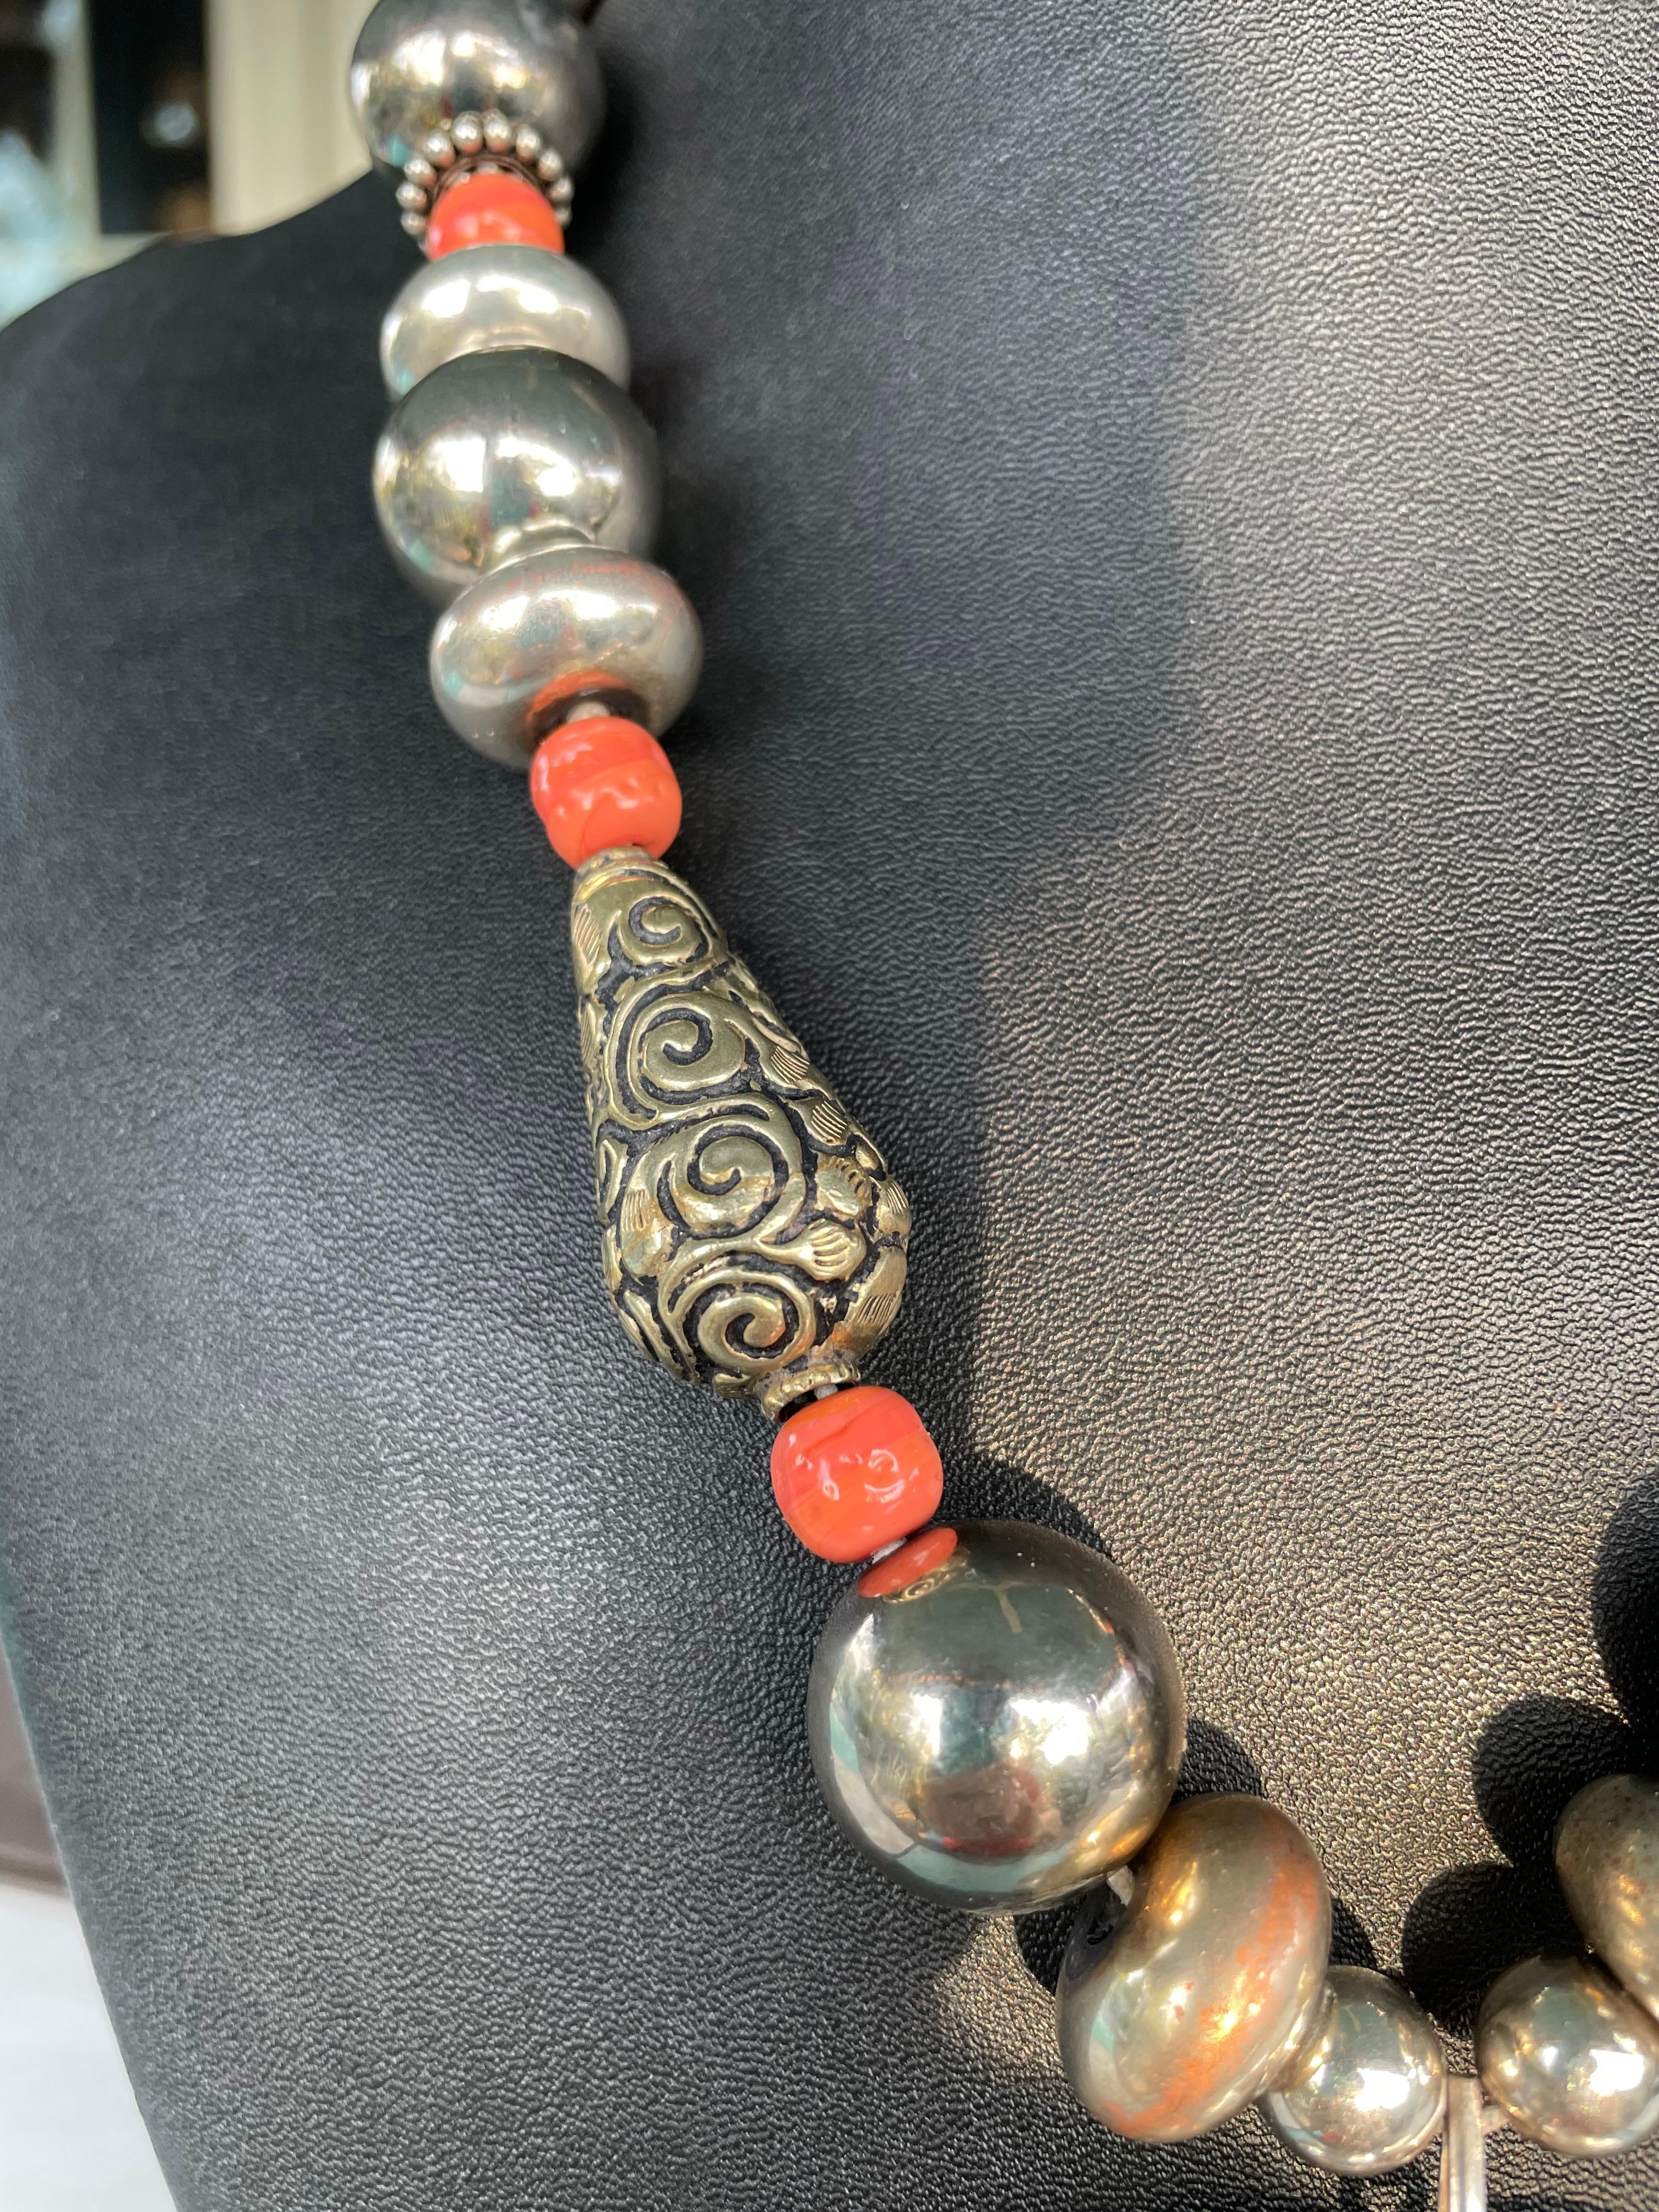 Lorraine’s Bijoux offers a one of a kind, handmade, Statement  necklace.A large puffy, vintage, sterling silver heart acts as the centerpiece on a string of vintage coral glass ,vintage Mexican sterling beads, and Tibetan repousse  beads. Sterling